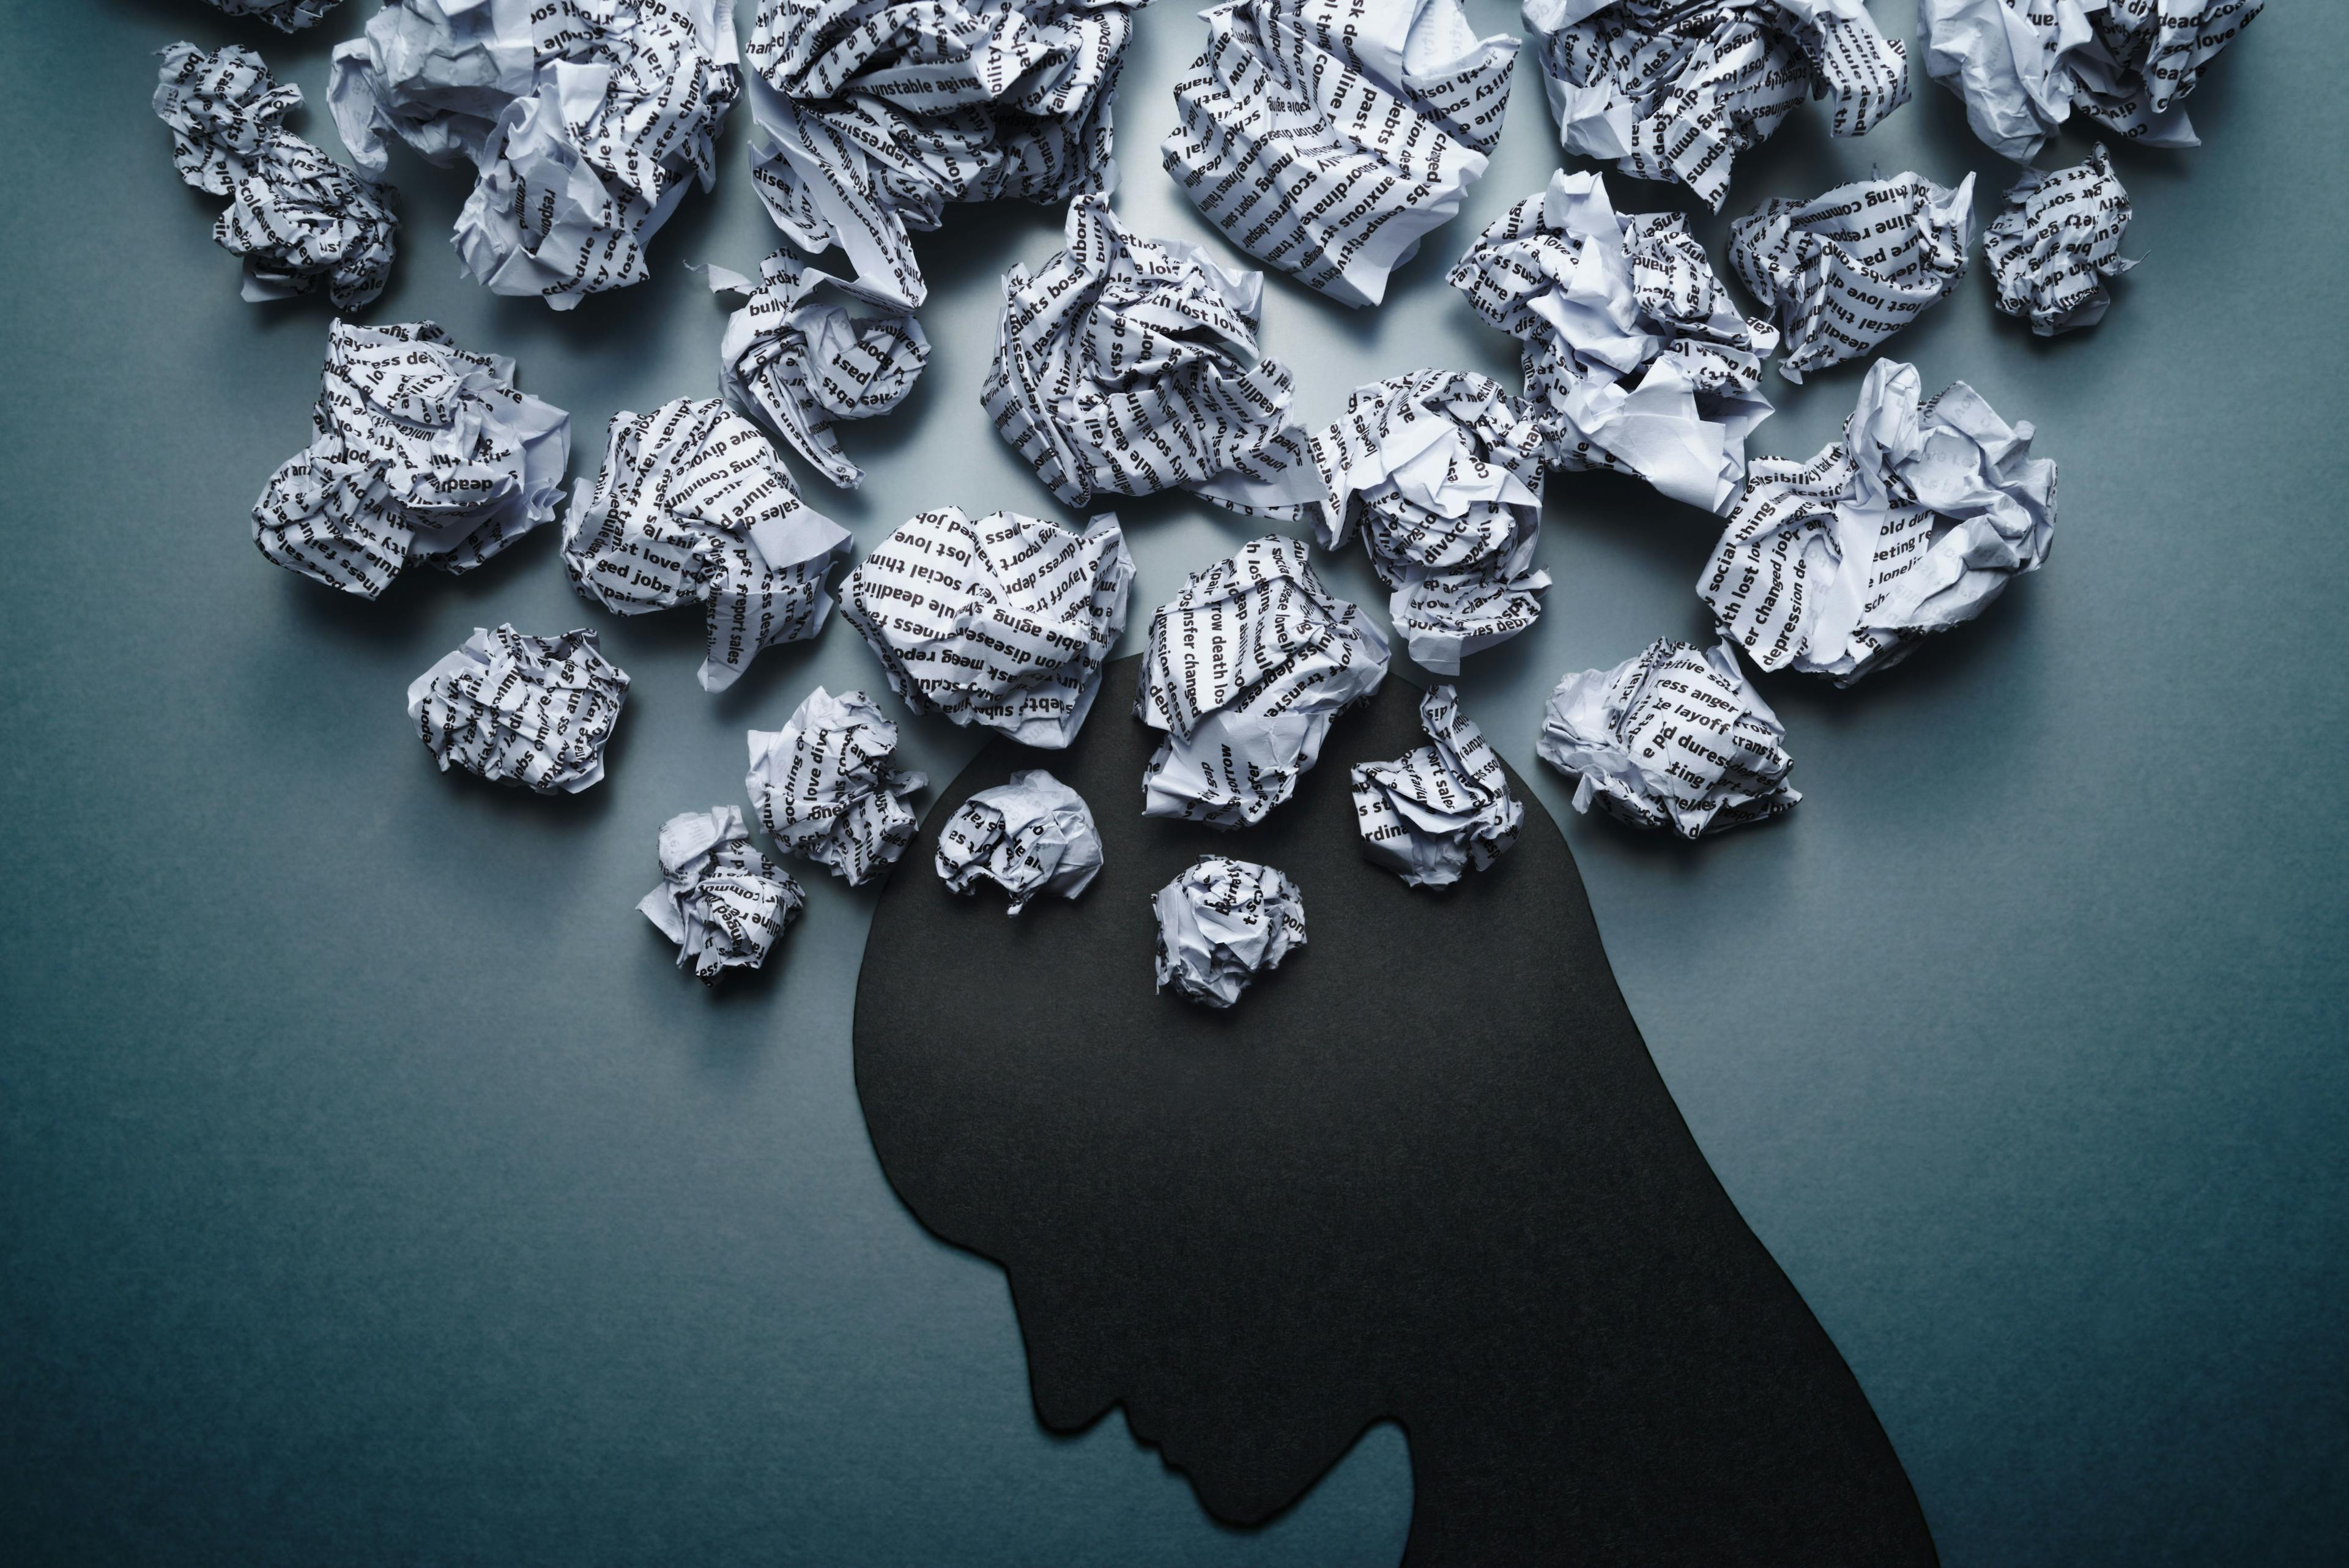 Silhouette of depressed person head. Concept image of depression and anxiety. Waste paper and head silhouette. | Image credit: © tadamichi - stock.adobe.com